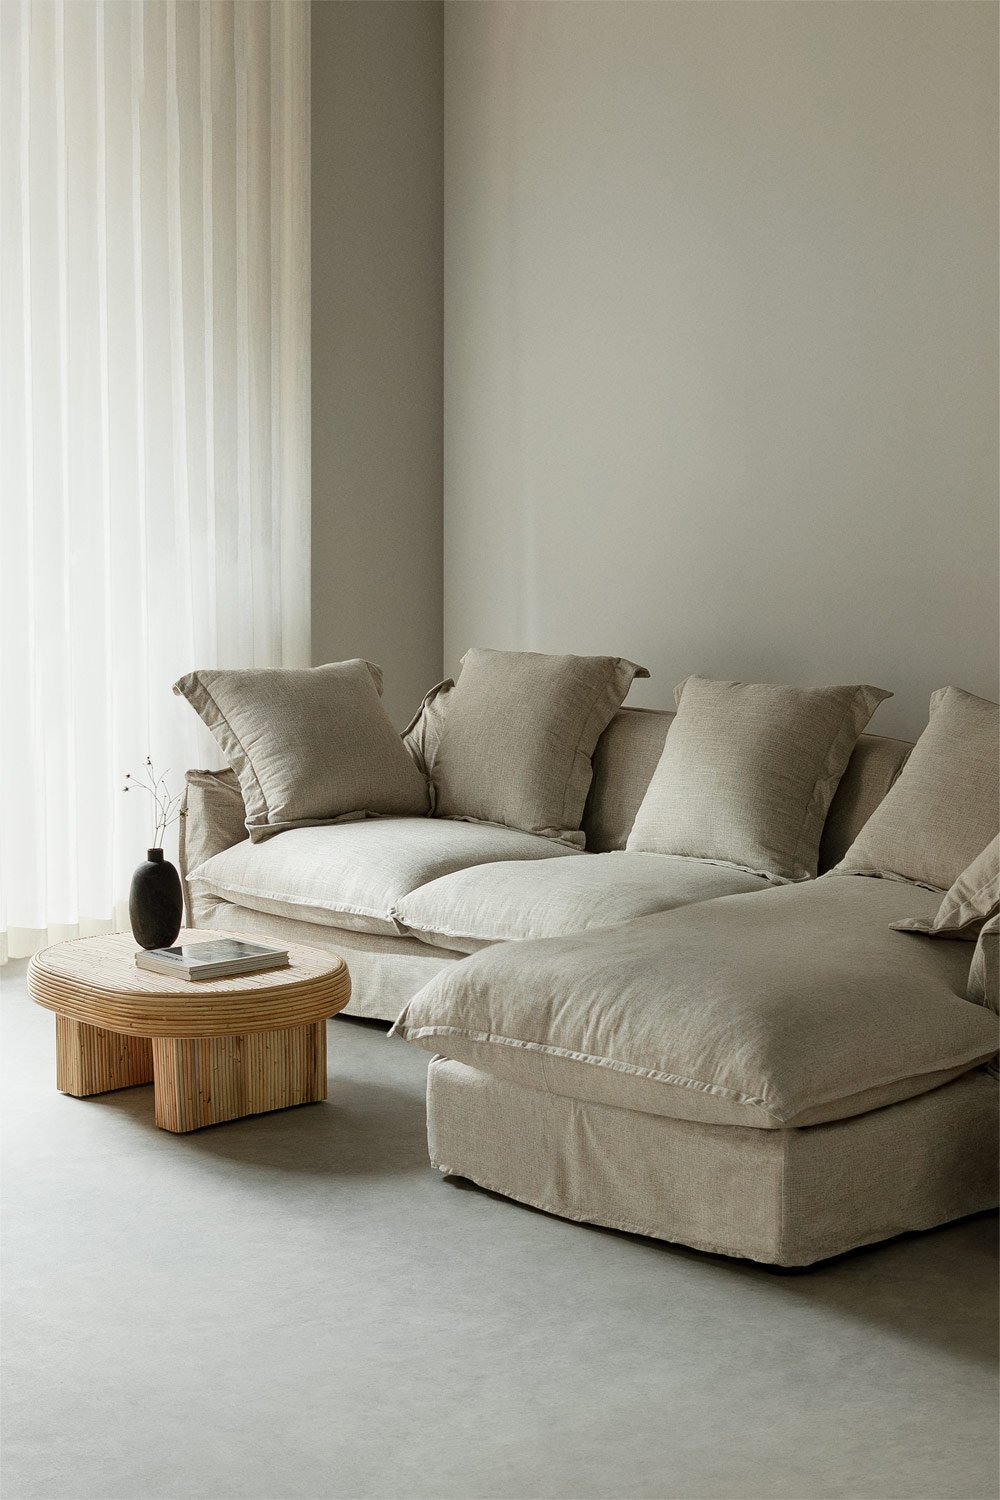 4 Seater Chaise Longue Sofa in Linen Kaylor, gallery image 1